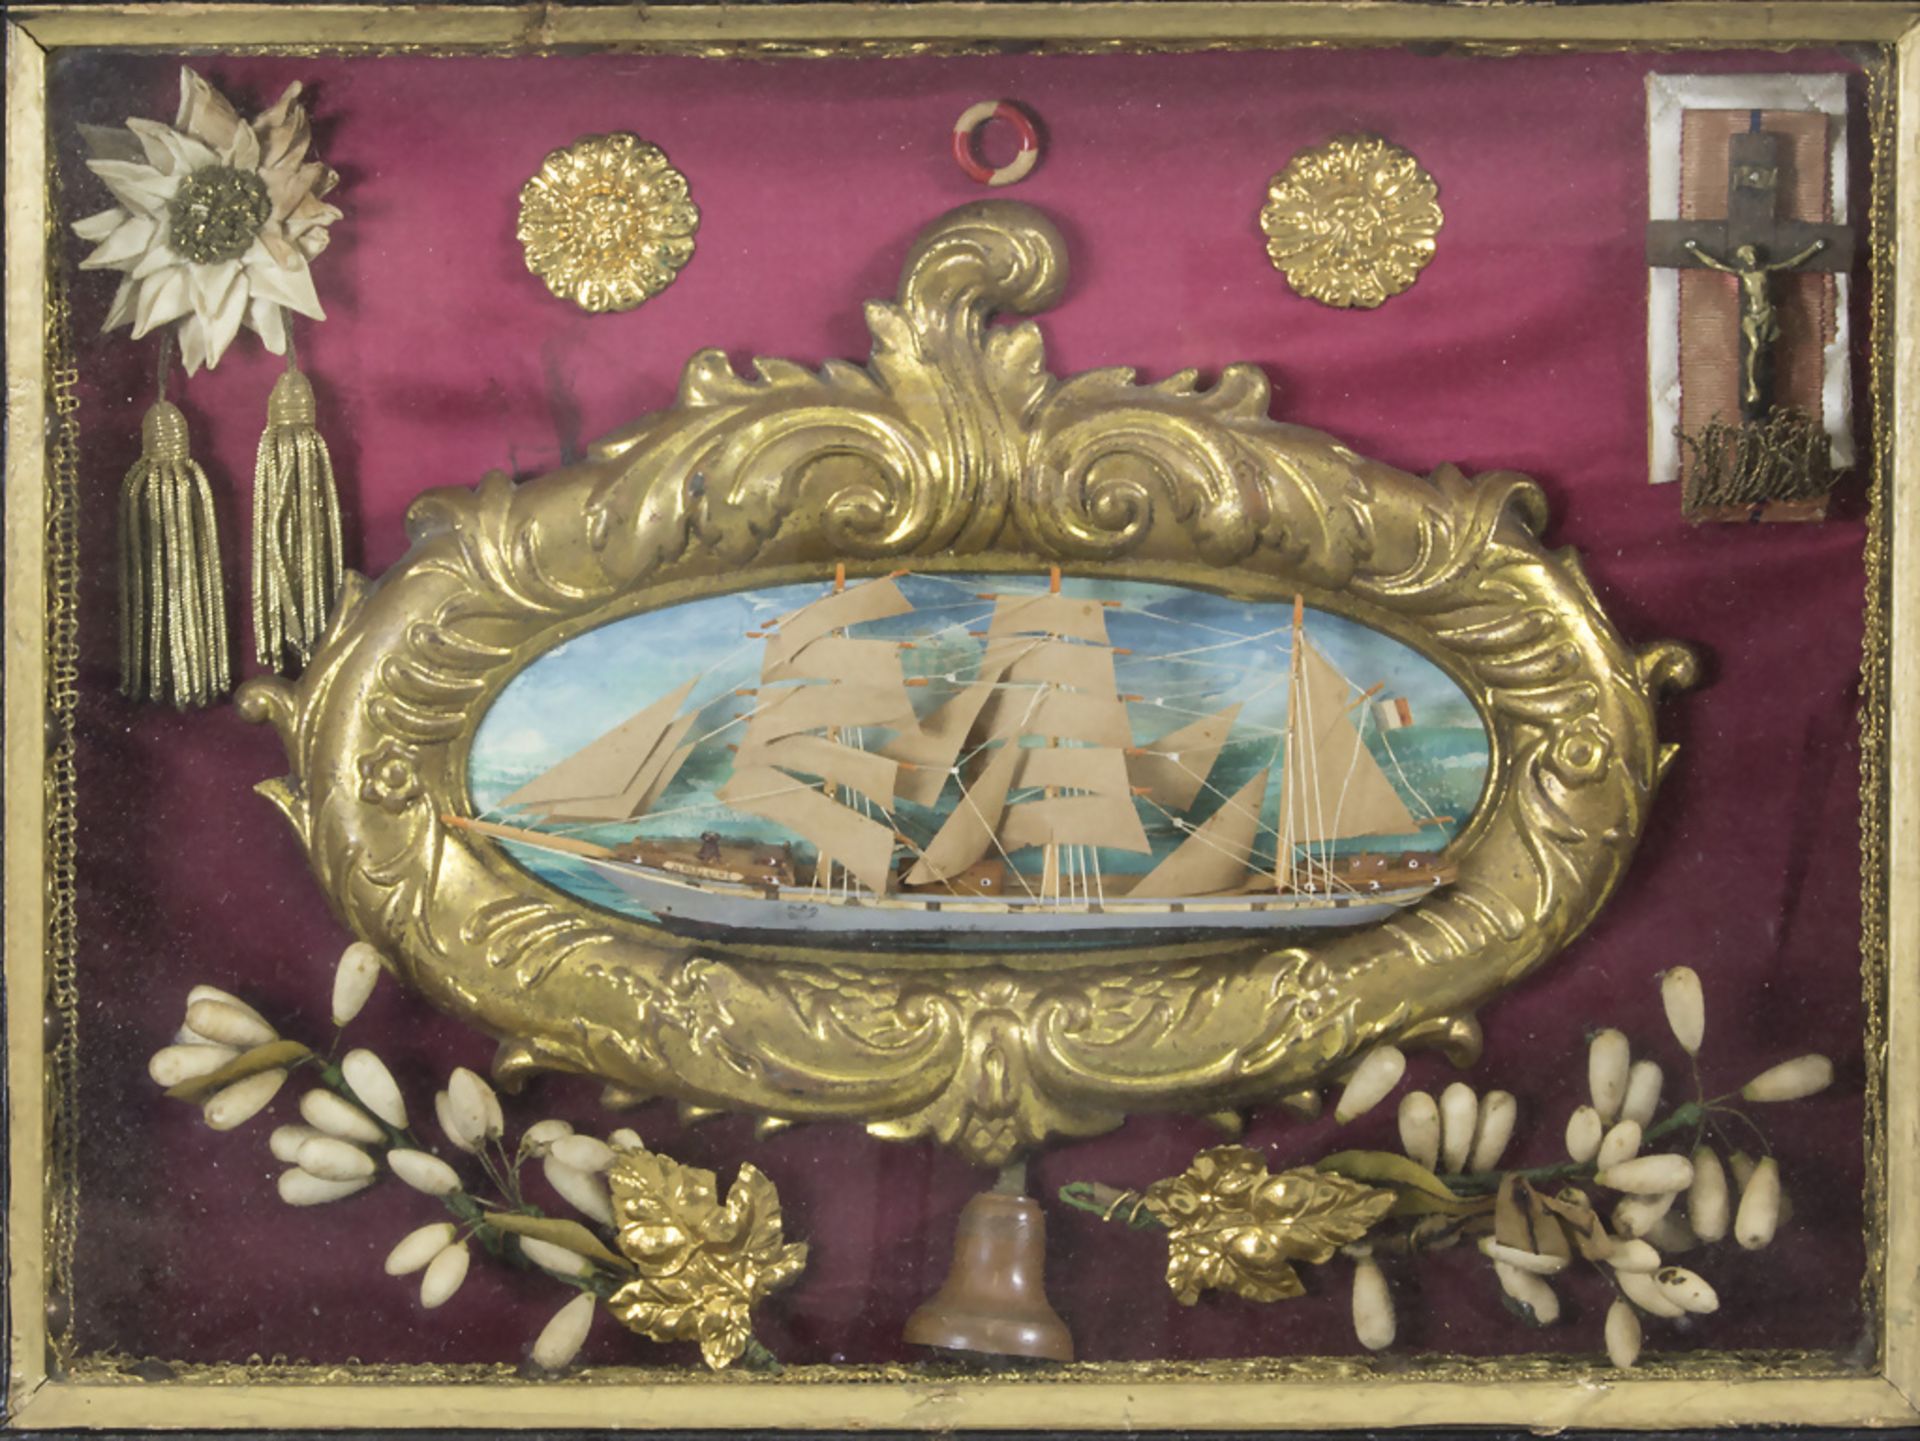 Maritimer Hausaltar mit Dreimastselger / A maritime house altar with a three-masted sailor, 19. Jh. - Image 2 of 4